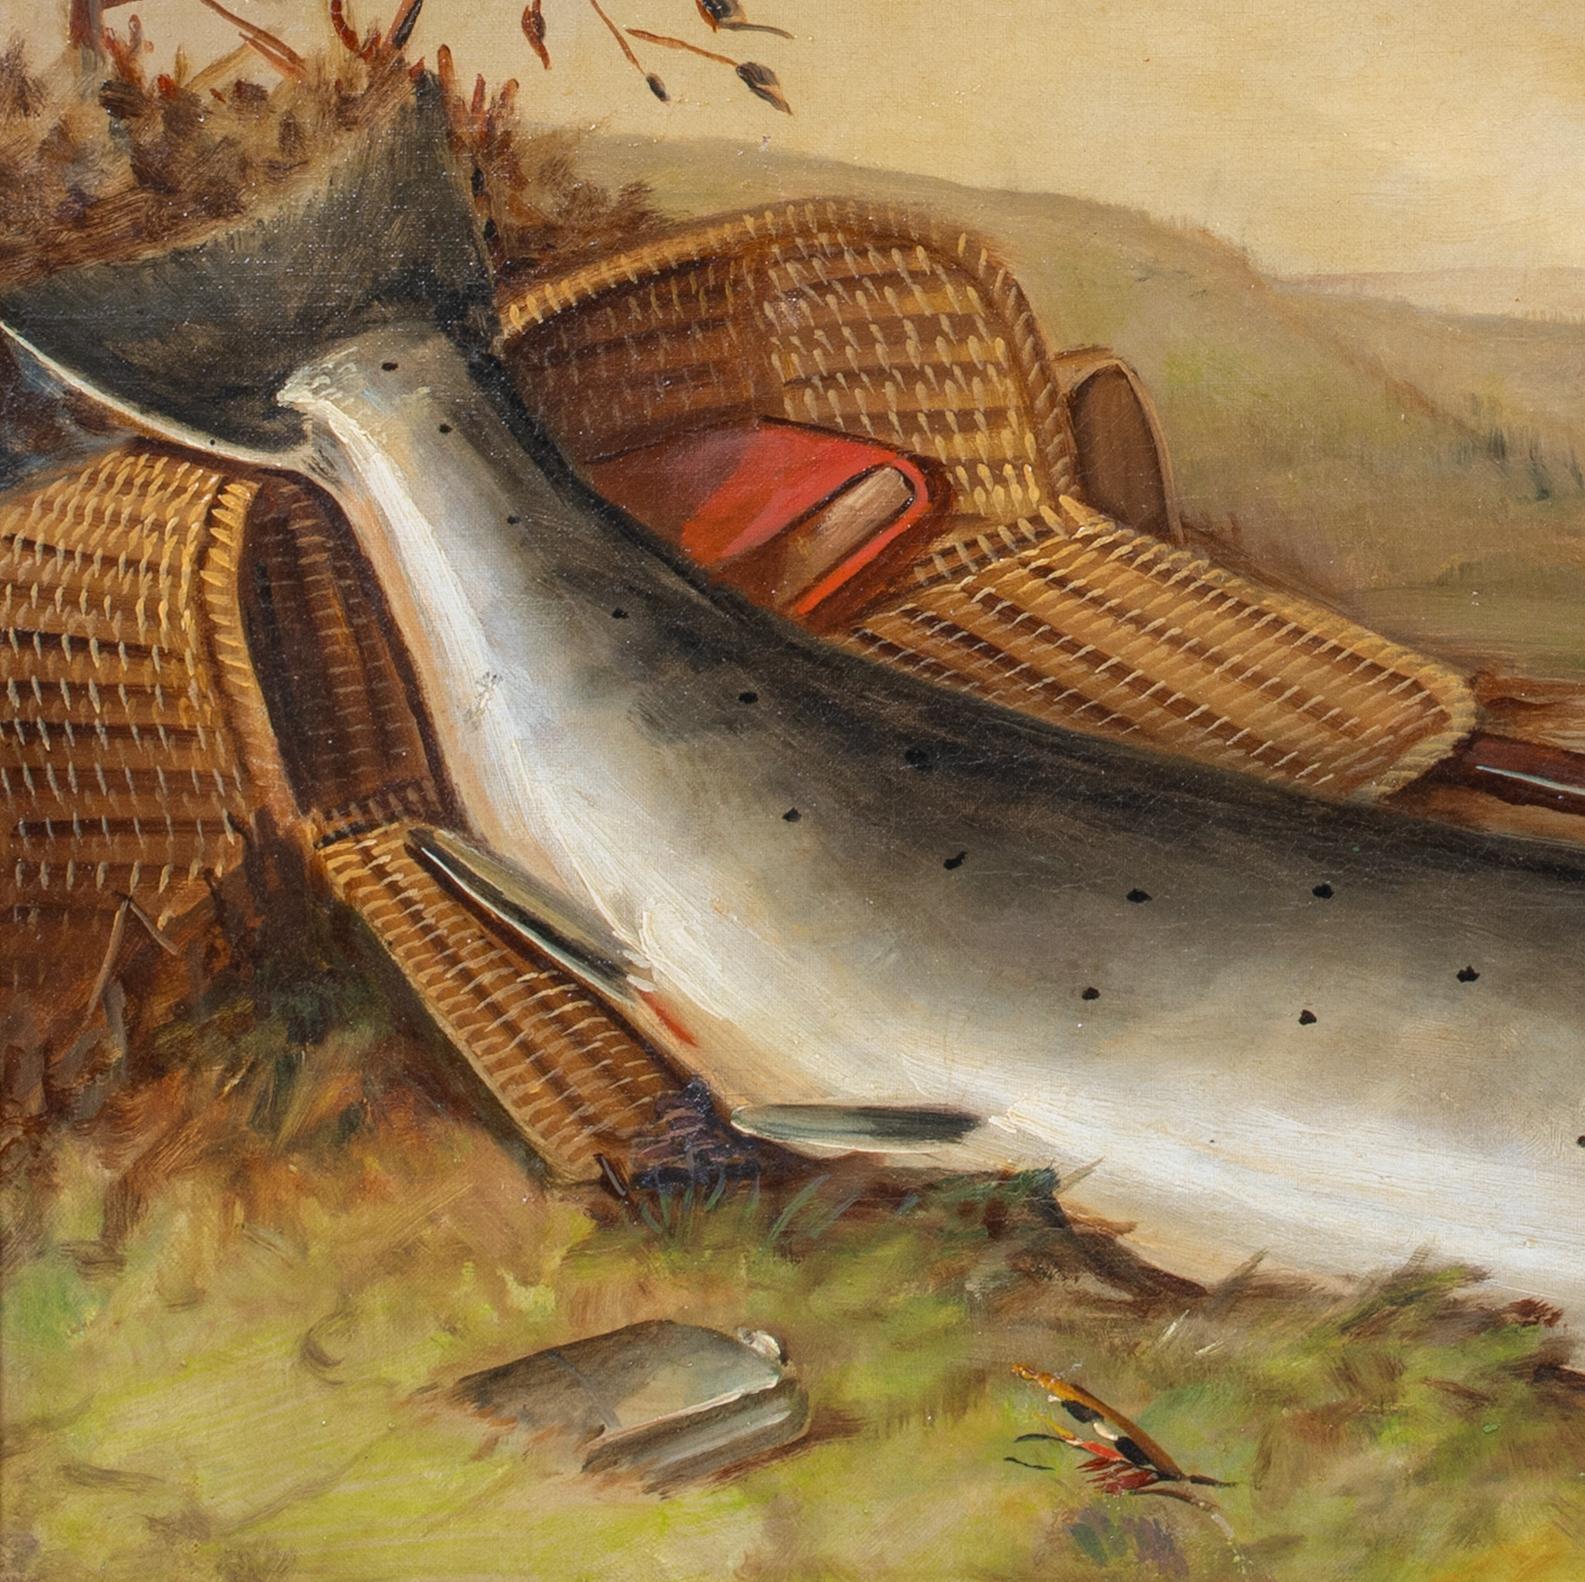 Salmon On The Riverbank, 19th Century

by Robert Kell (1829-1902)

Large 19th Century sporting still life study of Salmon on the riverbank beside a fishing basket, oil on canvas by Robert Kell. Excellent quality and condition large scale study